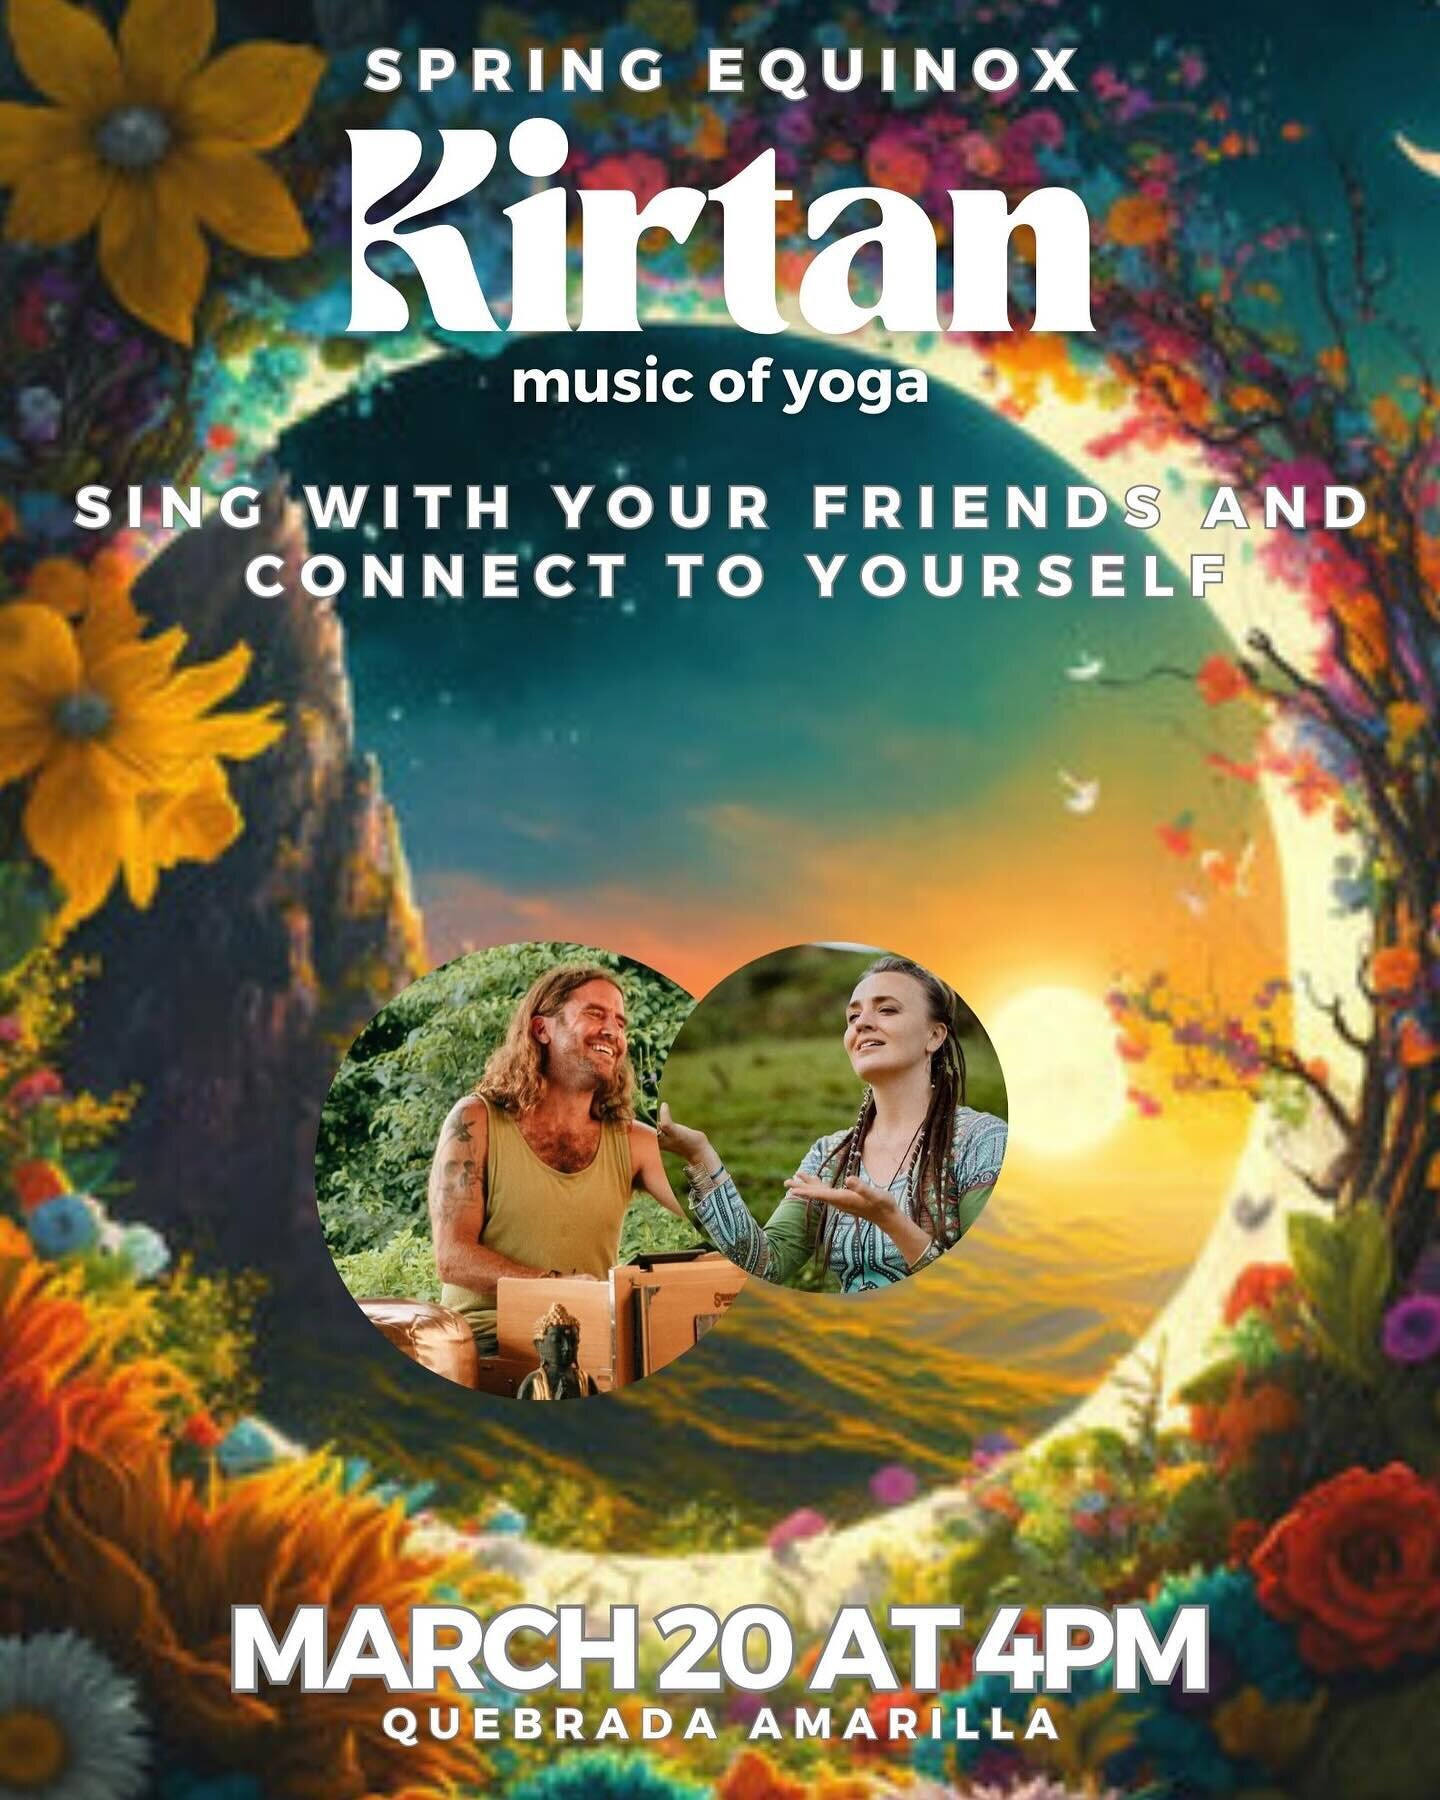 Special Spring Equinox gathering, friends! ☀️

We look forward to seeing you on March 20 at 4pm for the Kirtan music and a potluck after!

Please, like comment this post if you are coming so that I could arrange the space accordingly for our best con